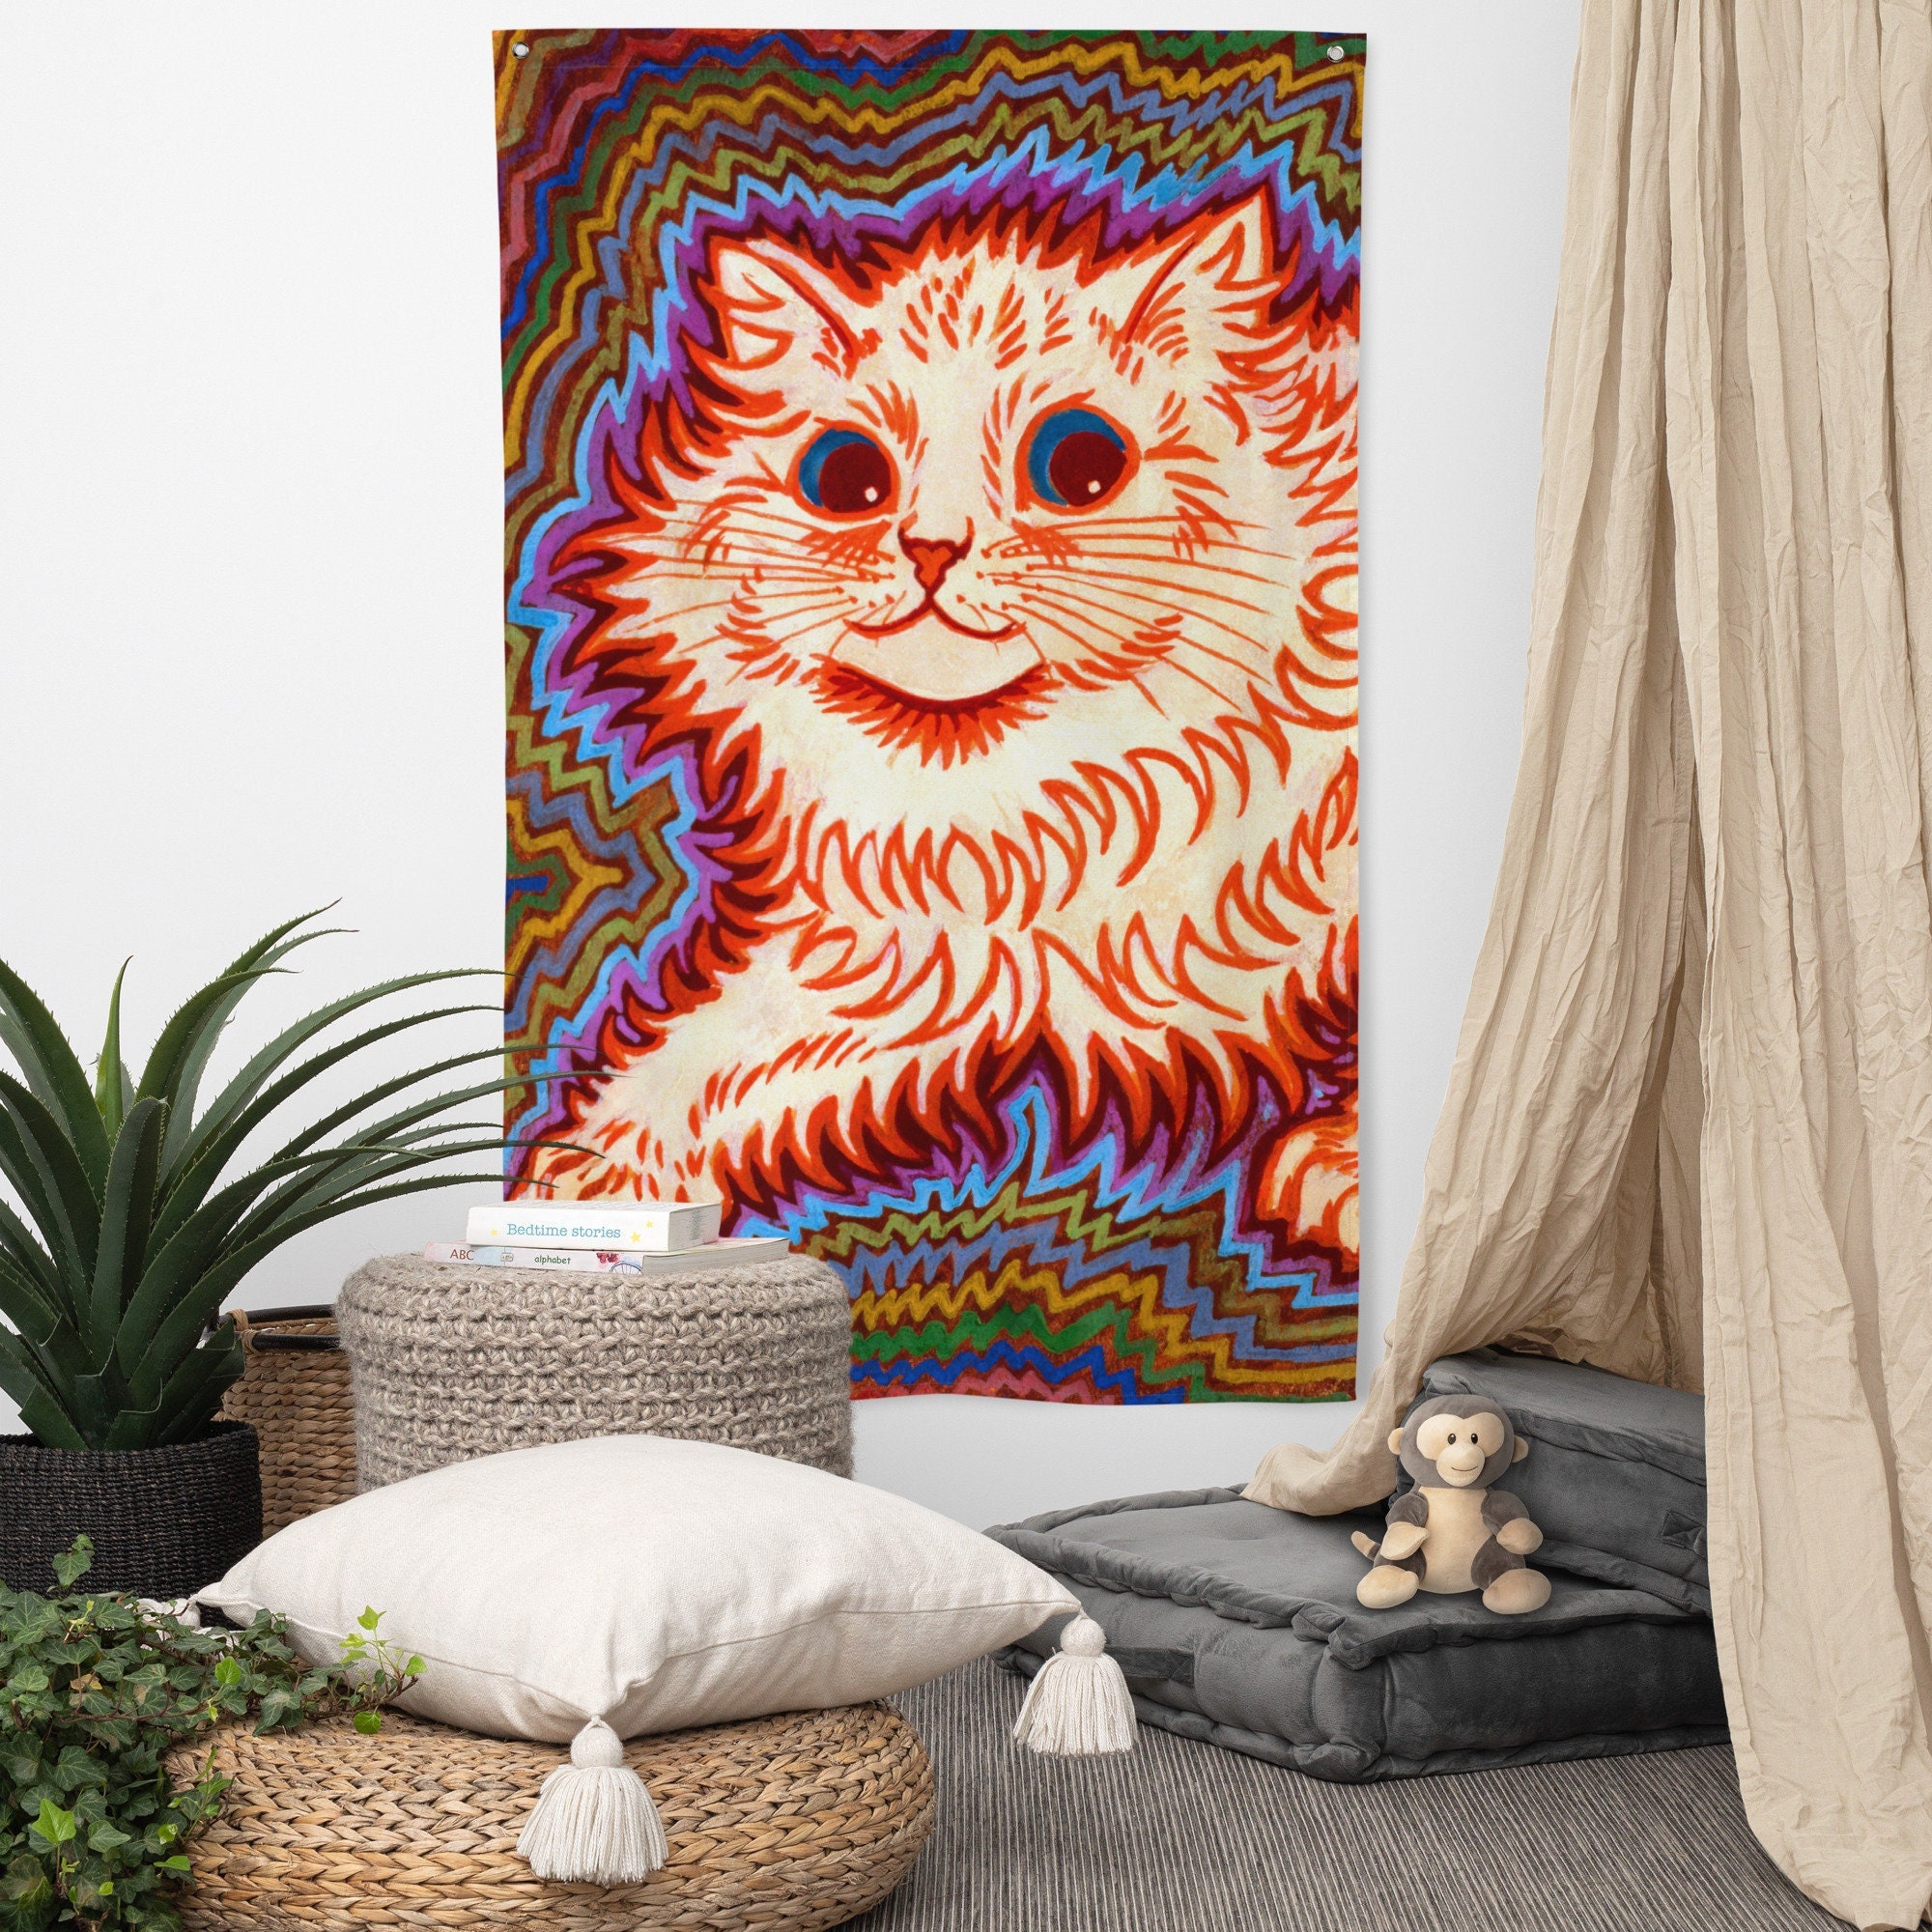 Louis Wain Cat Canvas Wall Art, Vintage Animal Illustration, Museum Poster,  Colorful Art Print Framed Poster for Sale by RegalAlex